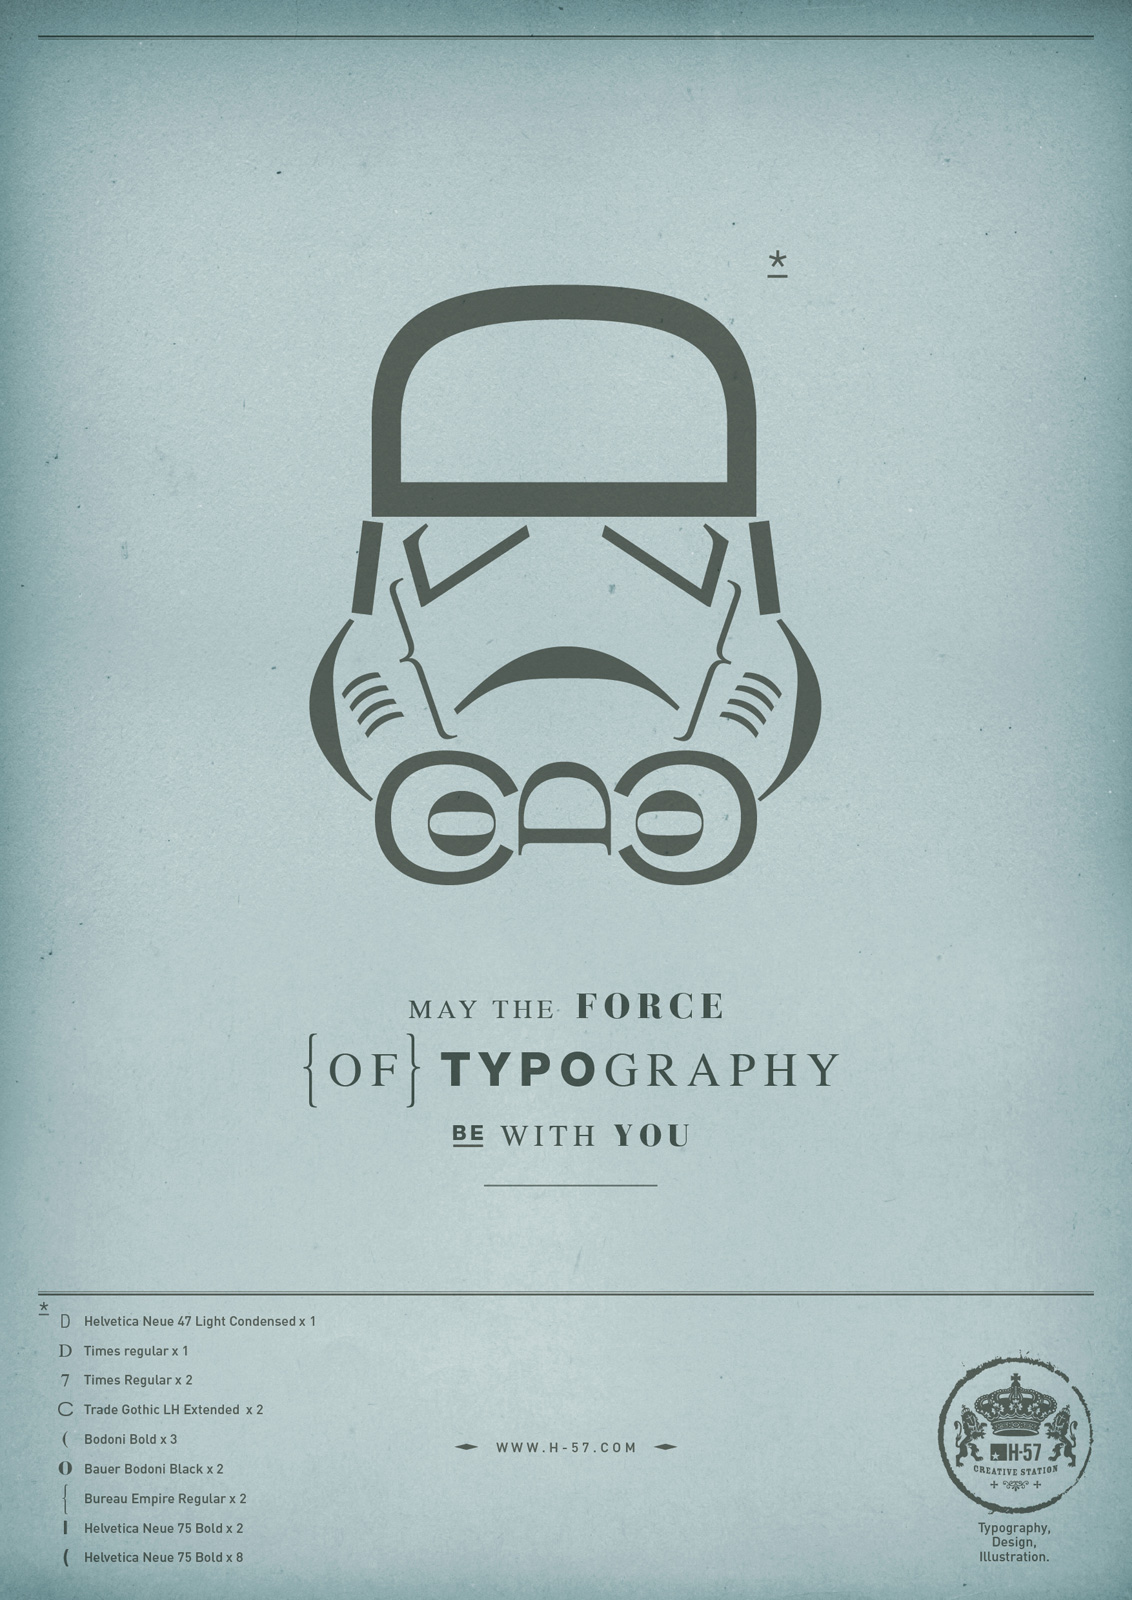 Star Wars Typography: 3 Amazing Ad Campaign Posters